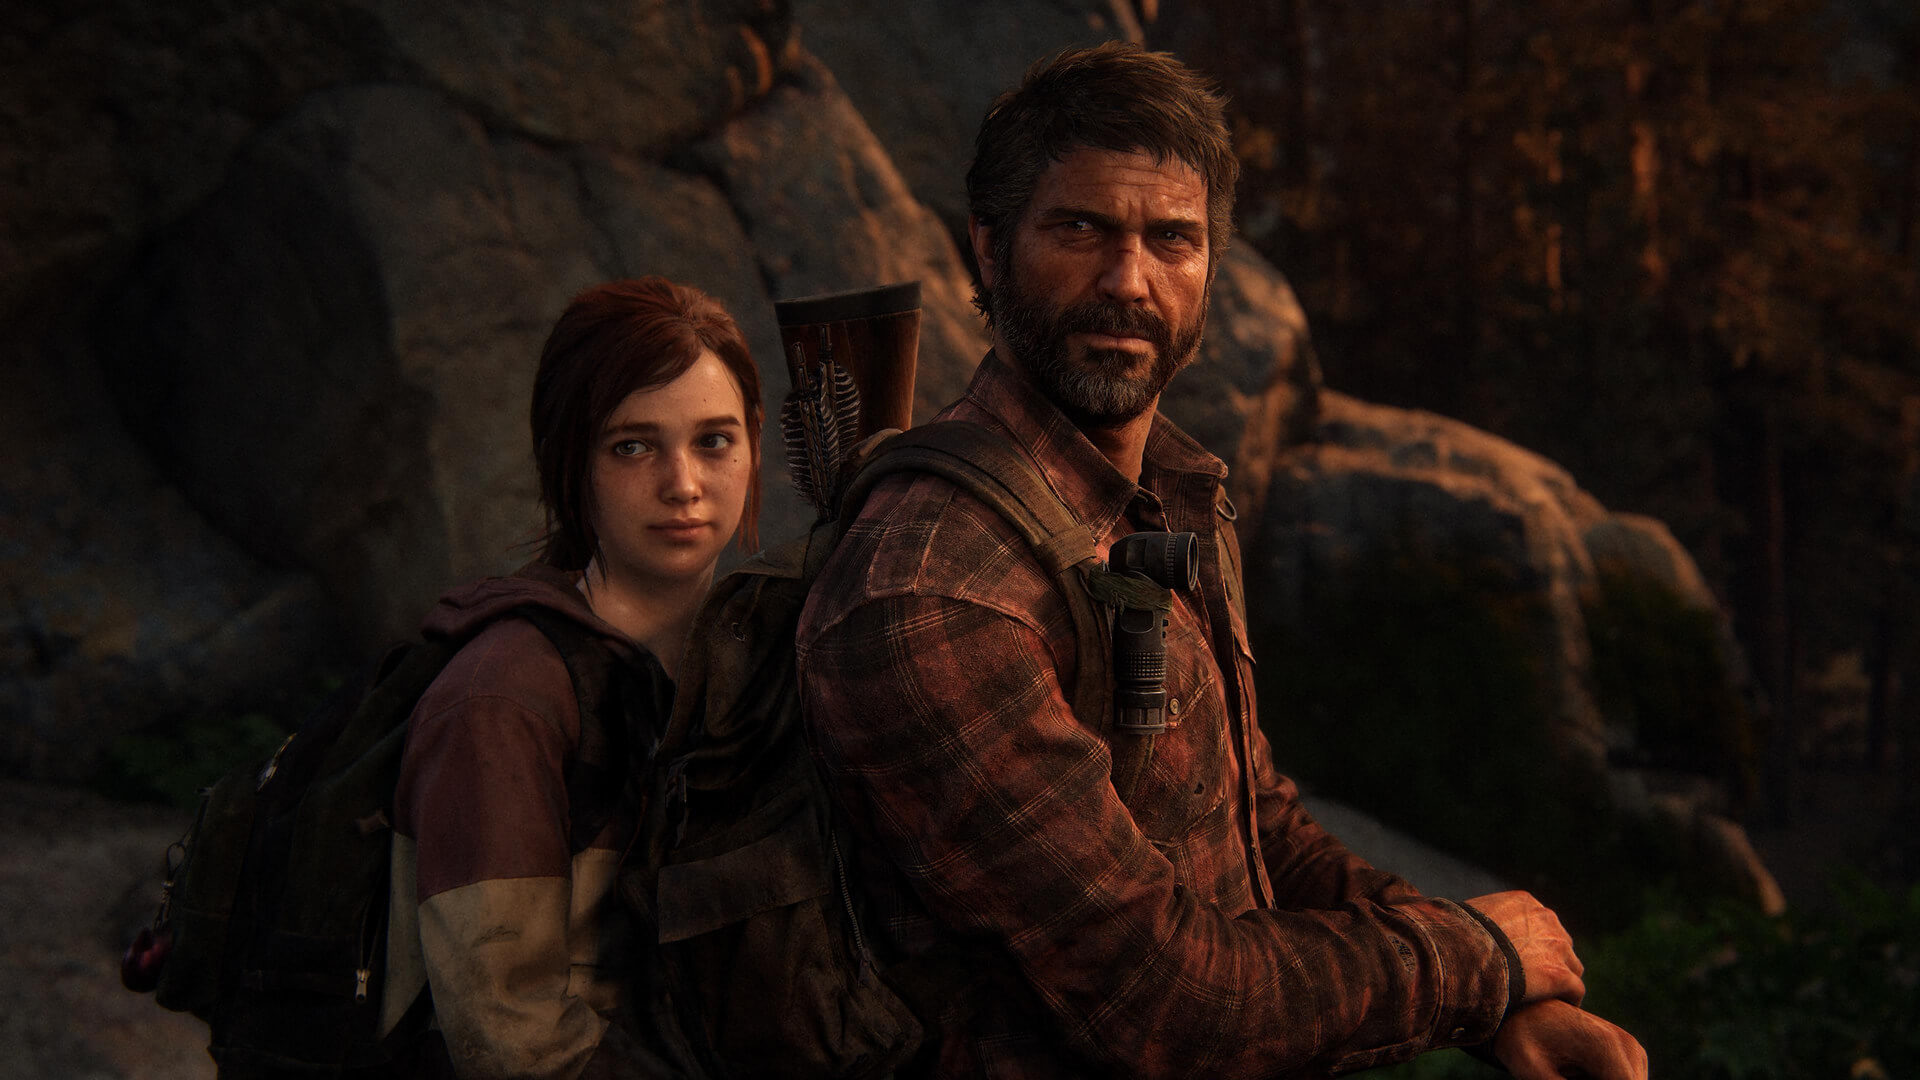 The Last of Us Part I March 30th Update released, full patch notes